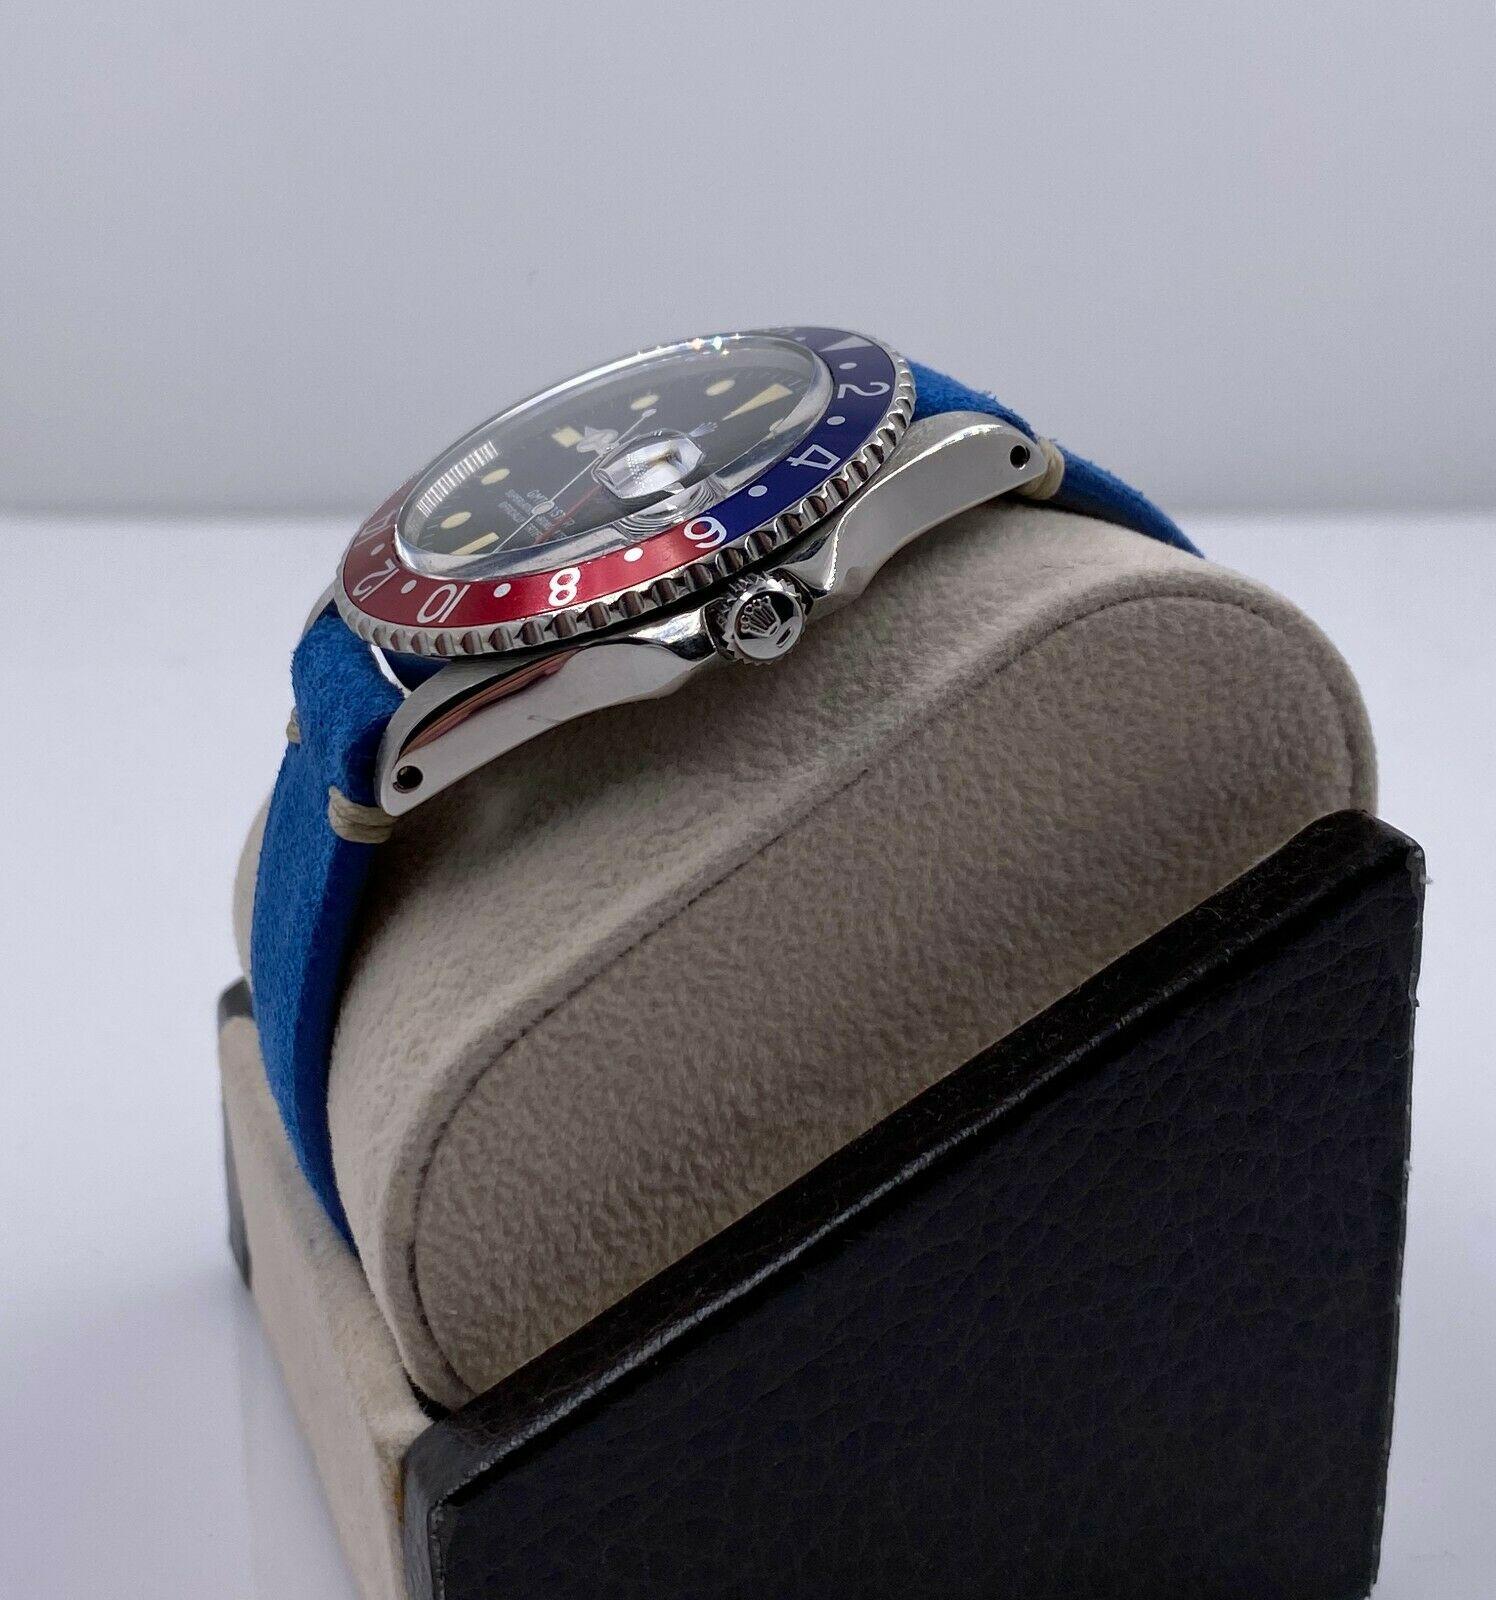 Vintage Rolex GMT Master 1675 Pepsi Red and Blue Stainless Steel, 1960 In Good Condition For Sale In San Diego, CA